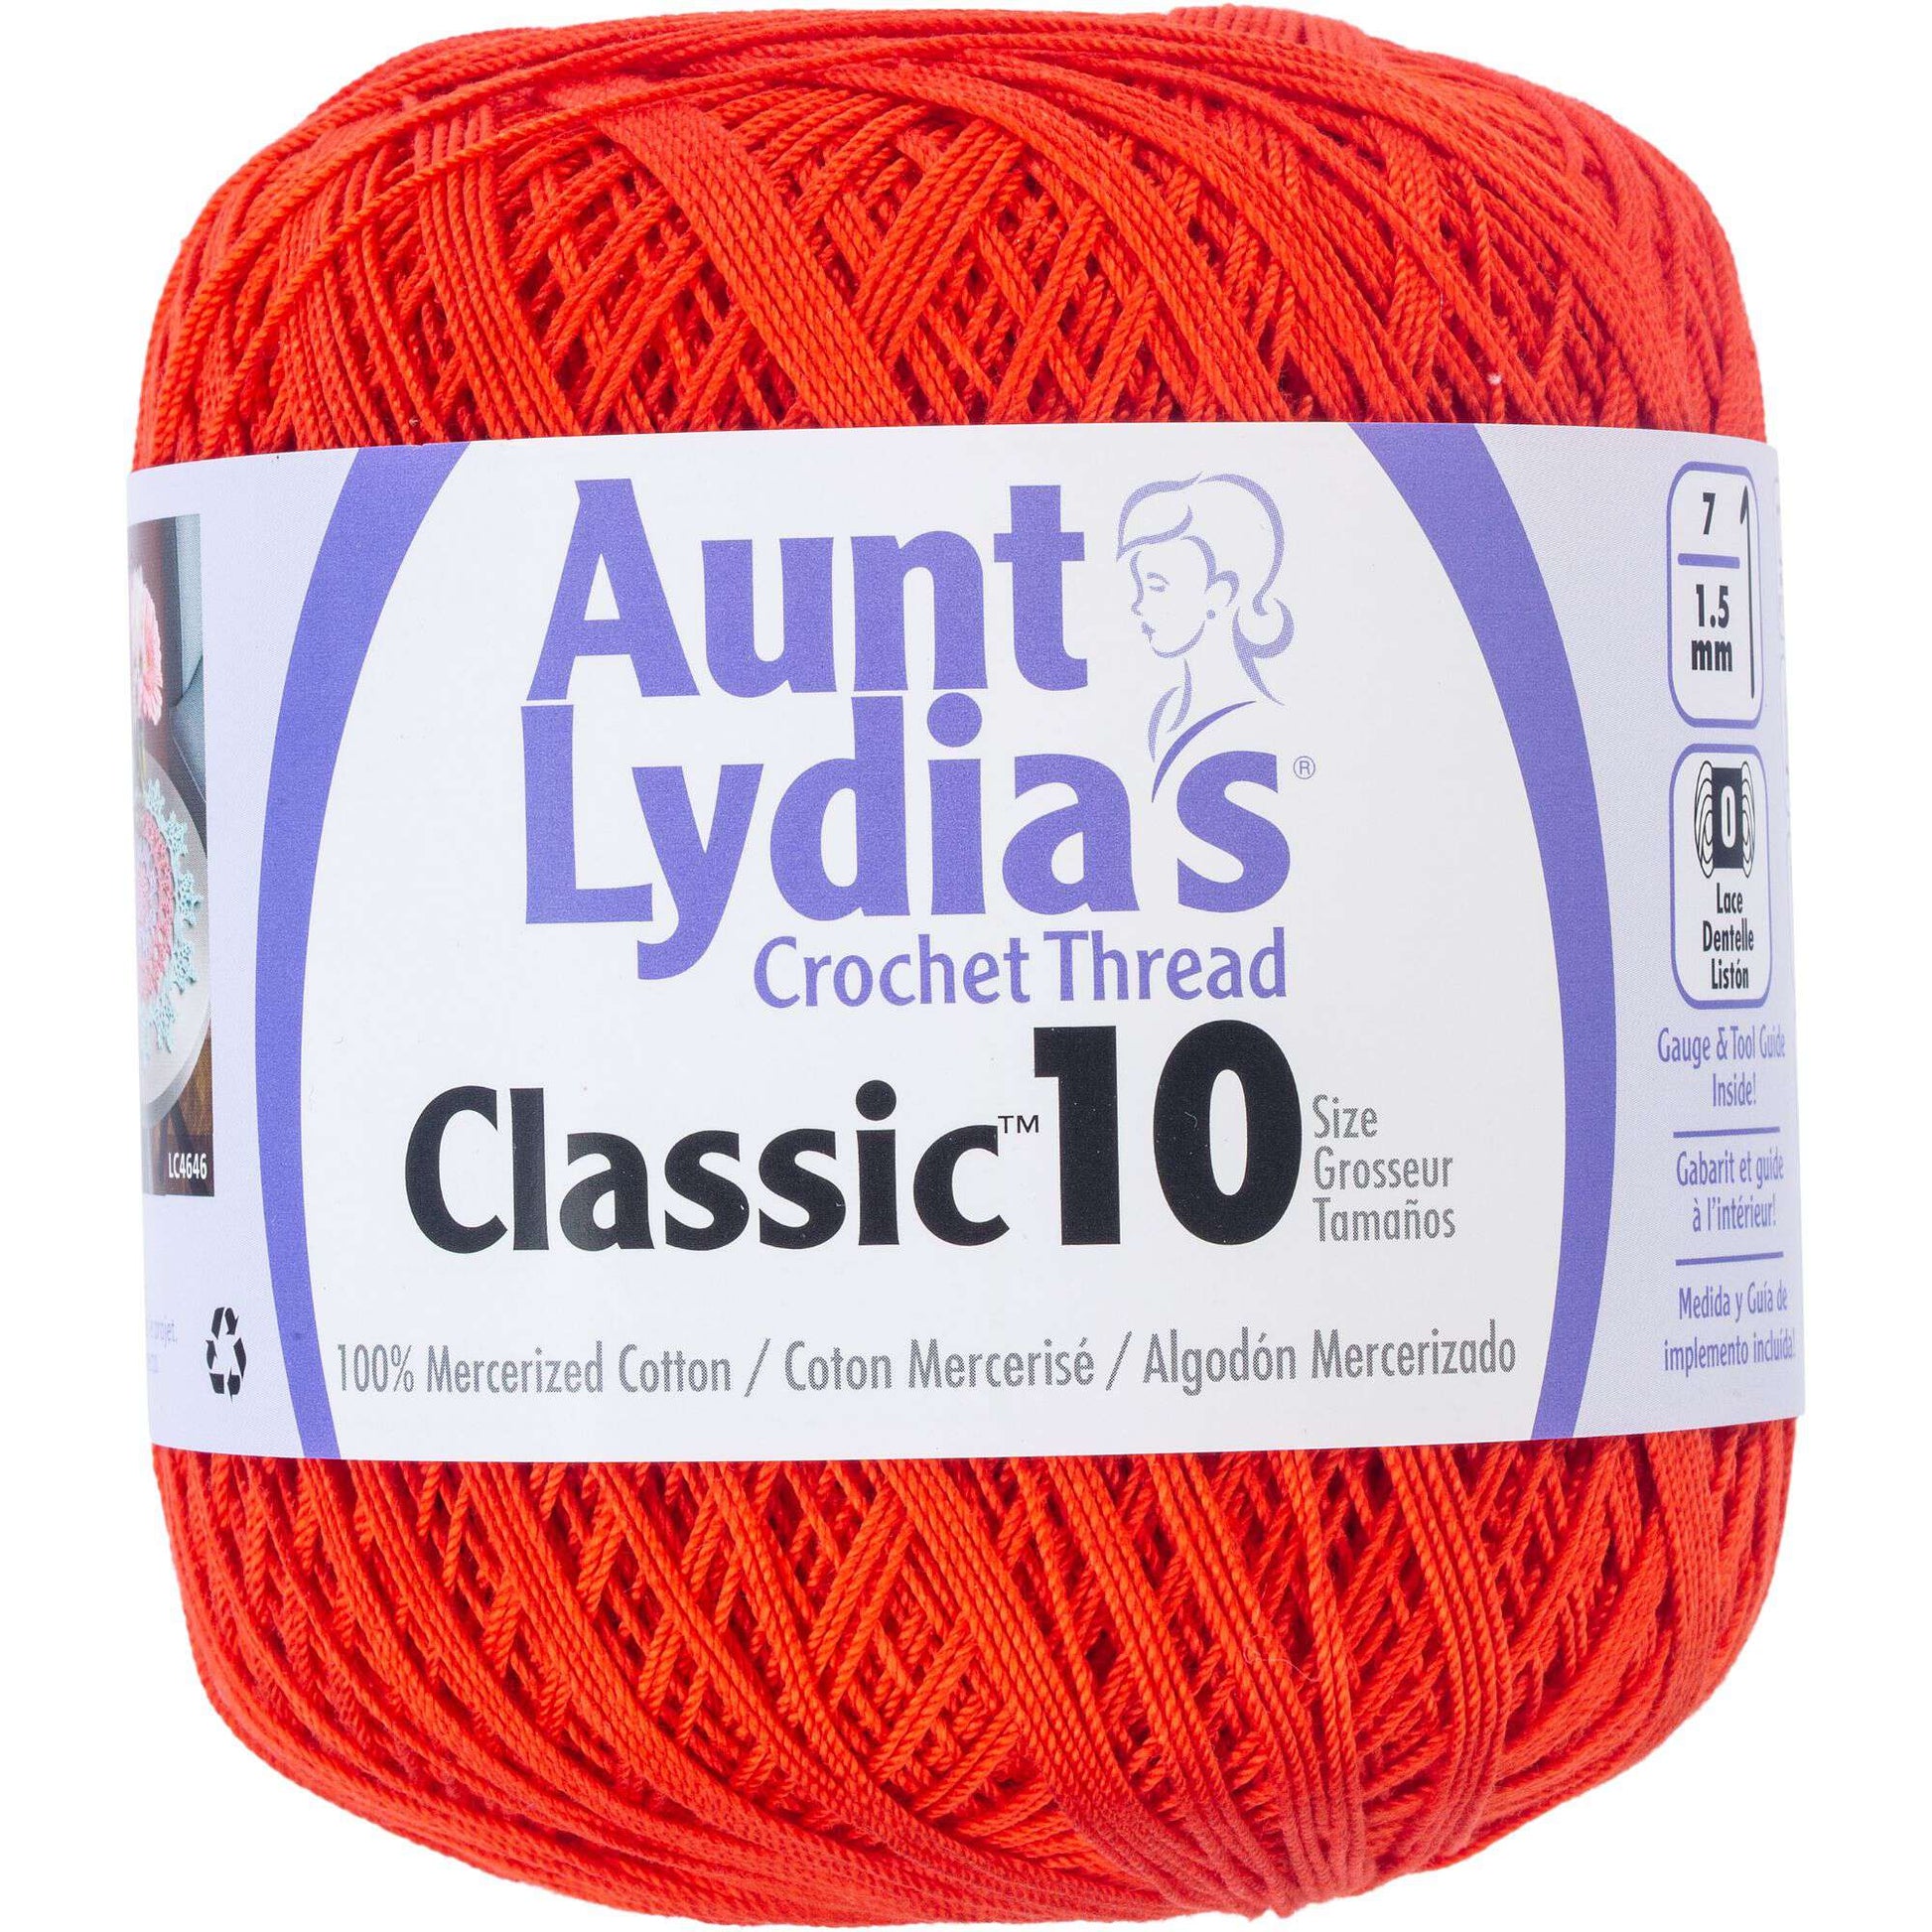 Aunt Lydia's Classic Crochet Thread Size 10 - Clearance shades Tomato